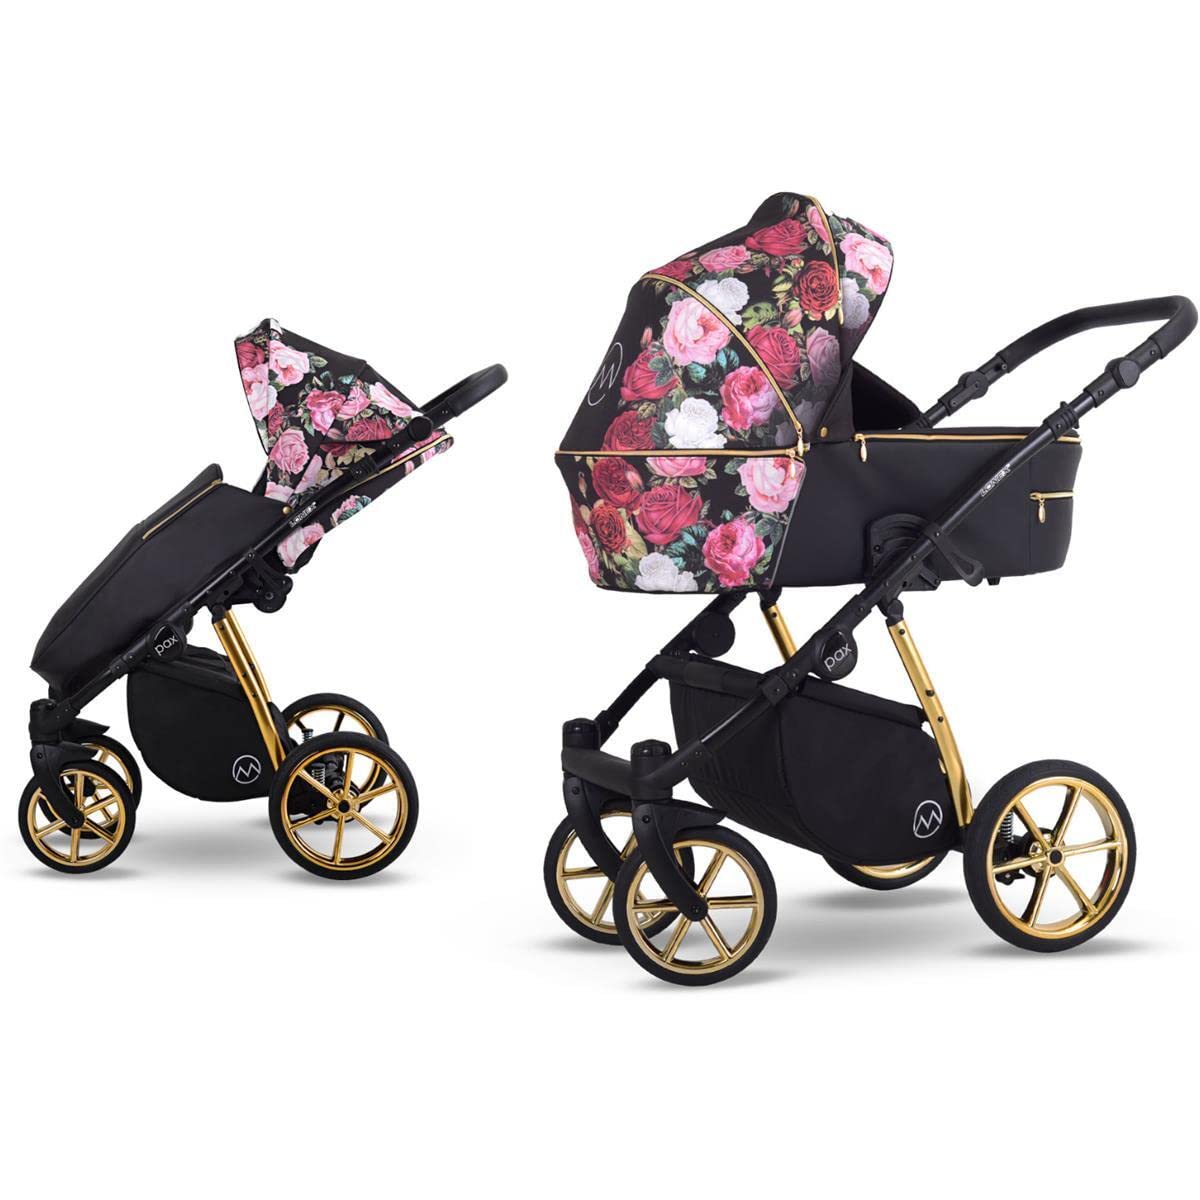 Pax by SaintBaby Rose Garden P04 2-in-1 Pram up to 22 kg Buggy Car Seat Selection 12 Colours without Baby Car Seat